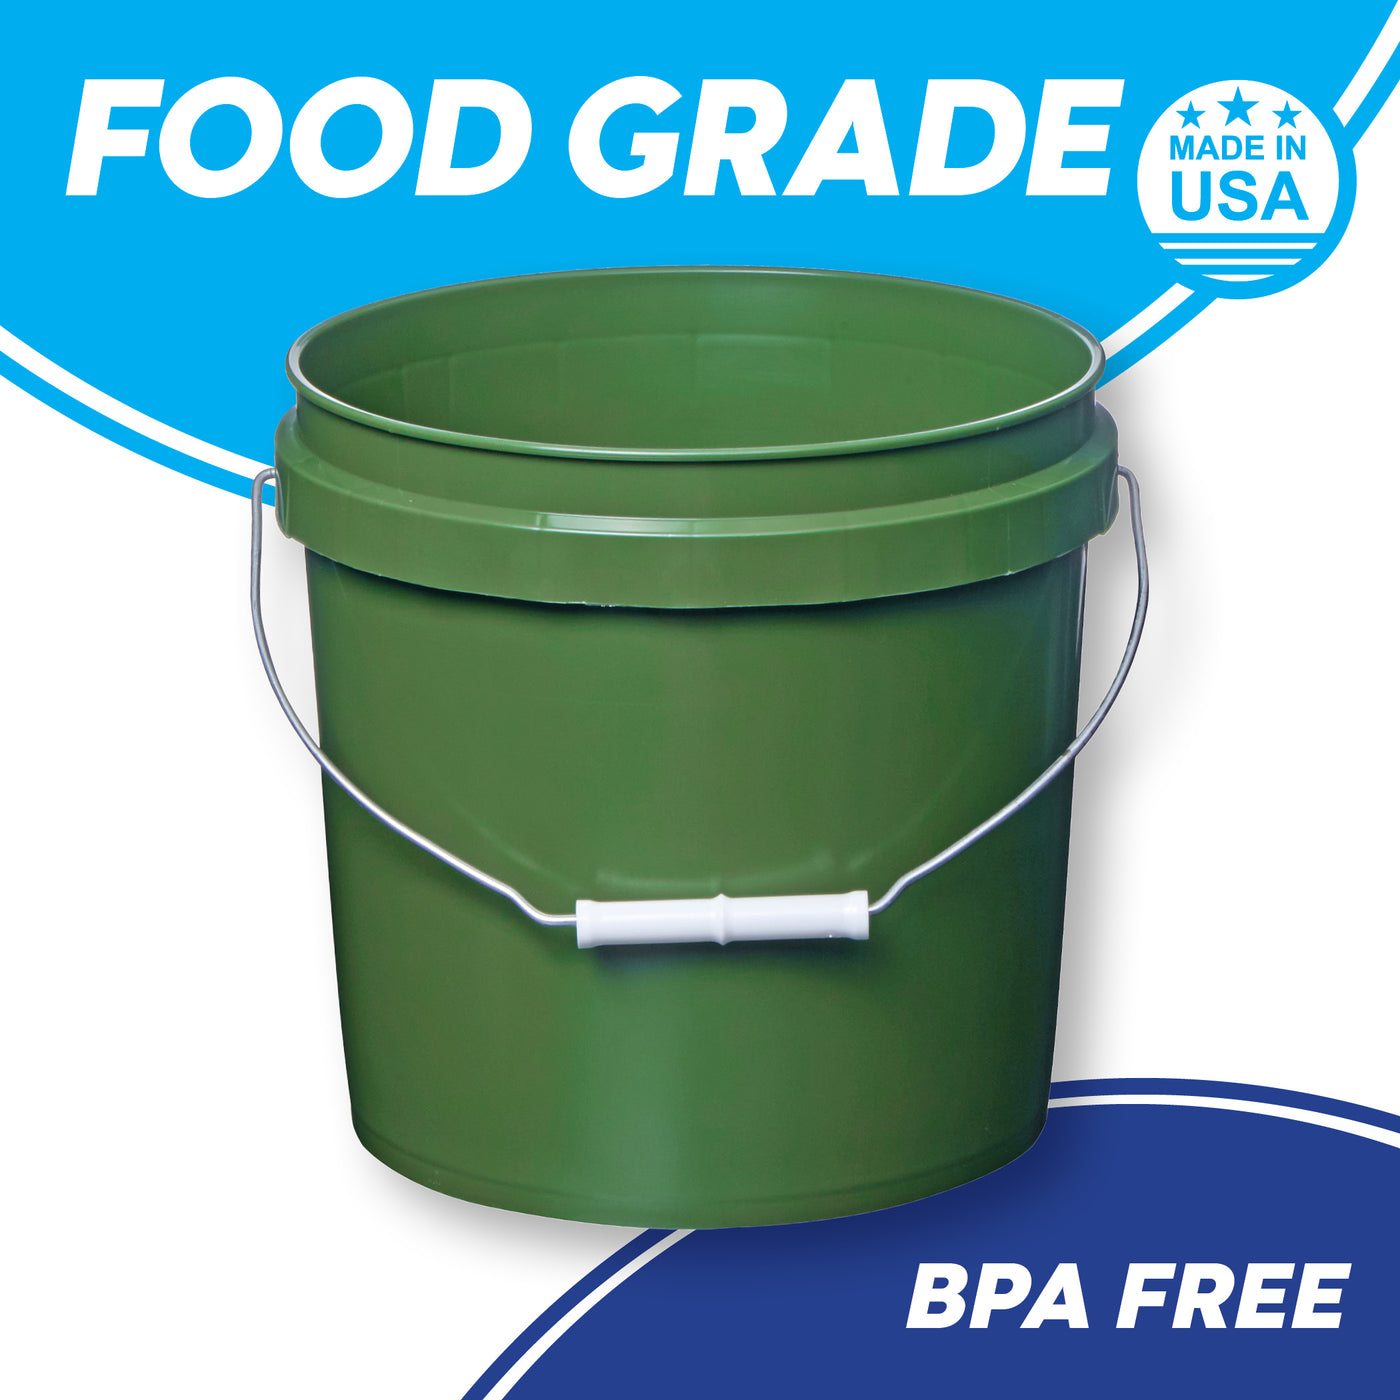 Consolidated Plastics 2 Gallon Food Grade Buckets, BPA Free Container  Storage, Durable HDPE Pails, Made in USA (6 Pack, White) - NO LIDS